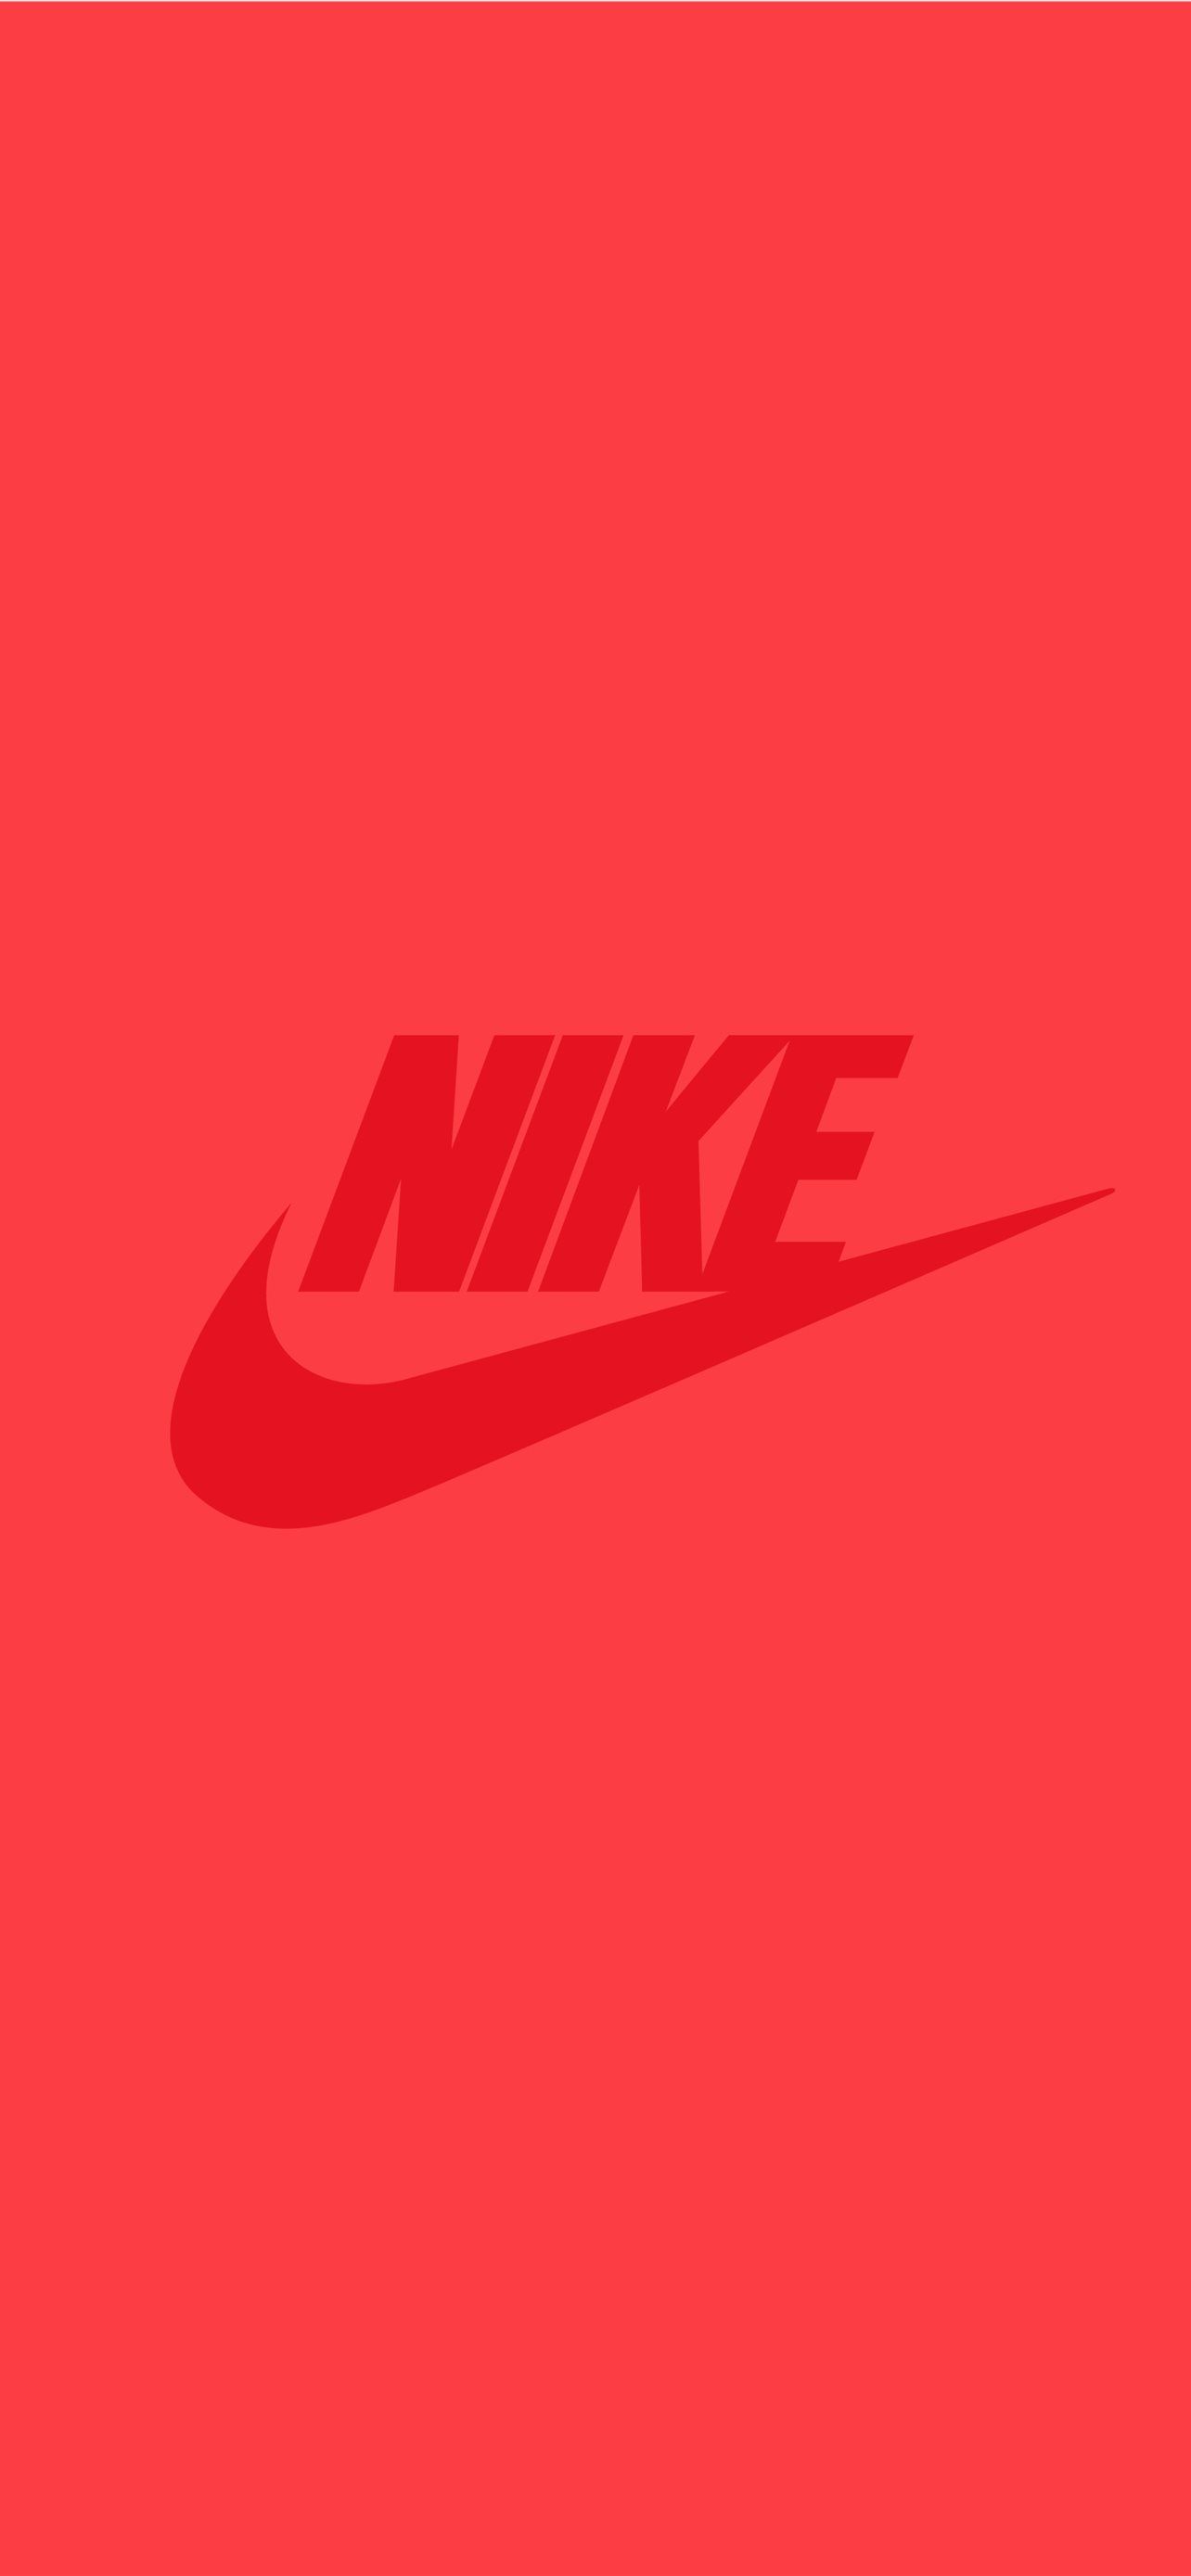 Nike red background wallpaper for iPhone and Android - Nike